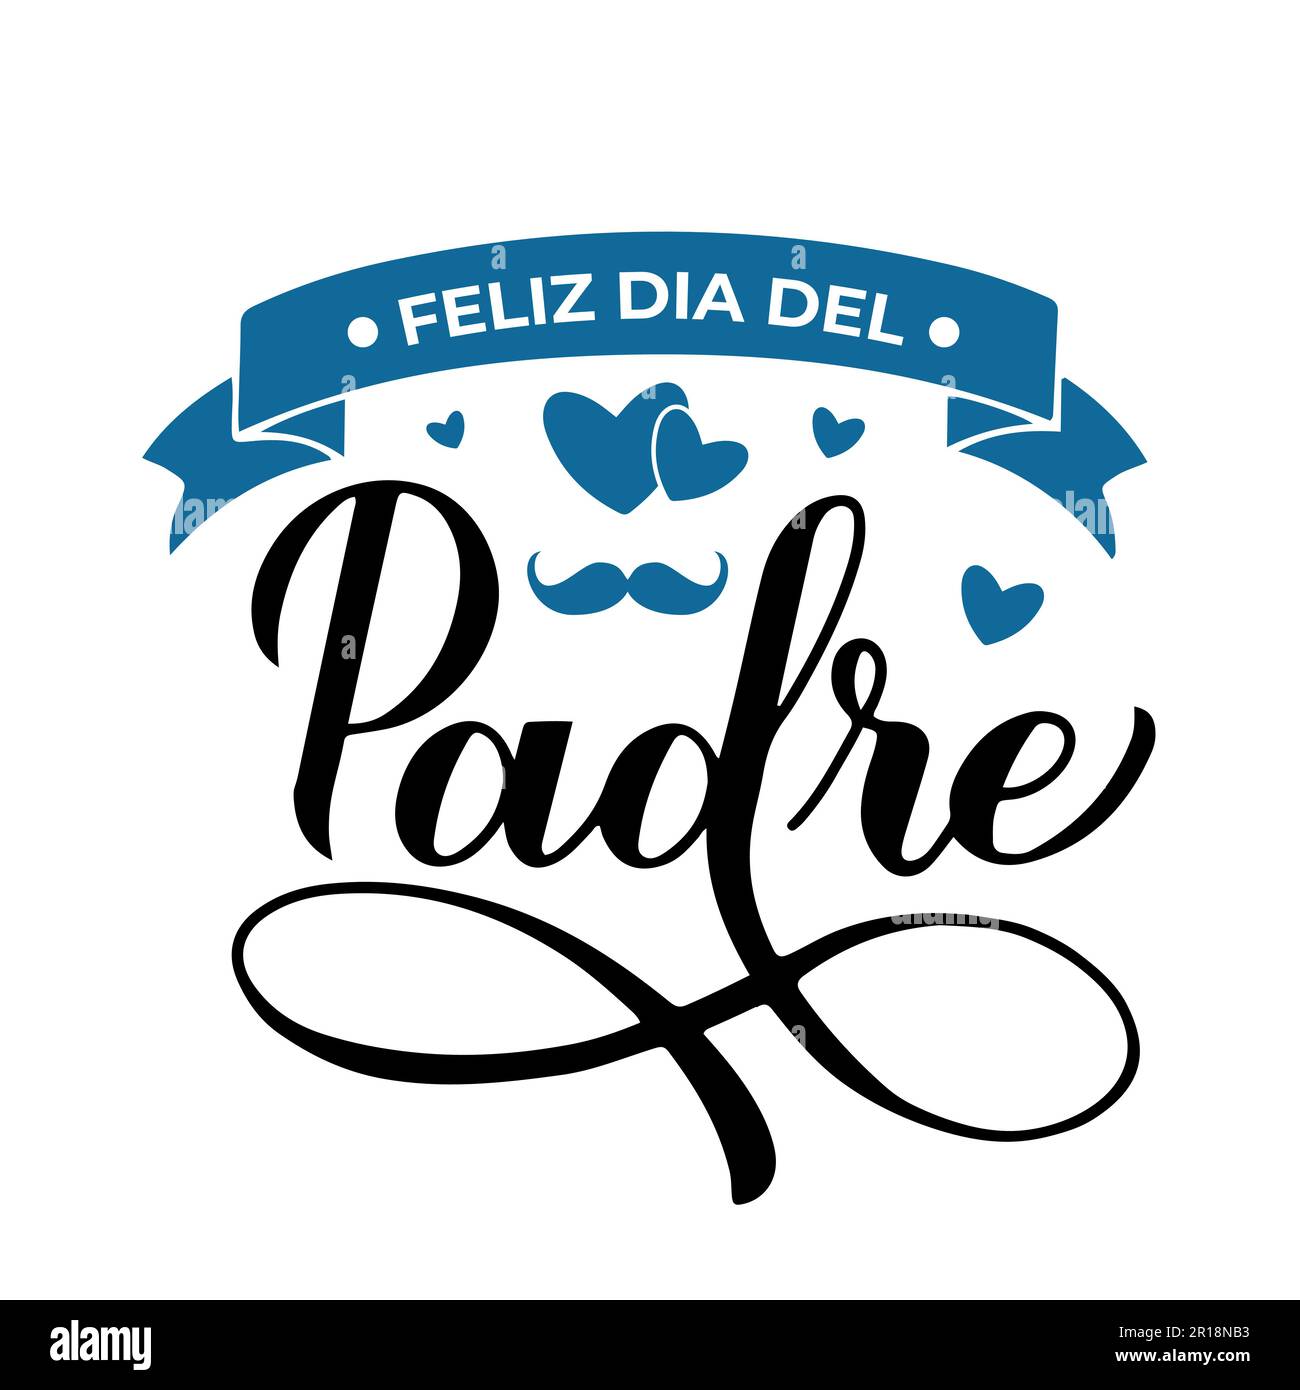 Feliz Dia del Padre calligraphy lettering isolated on white. Happy Fathers Day in Spanish. Vector template for poster, banner, greeting card, flyer, p Stock Vector